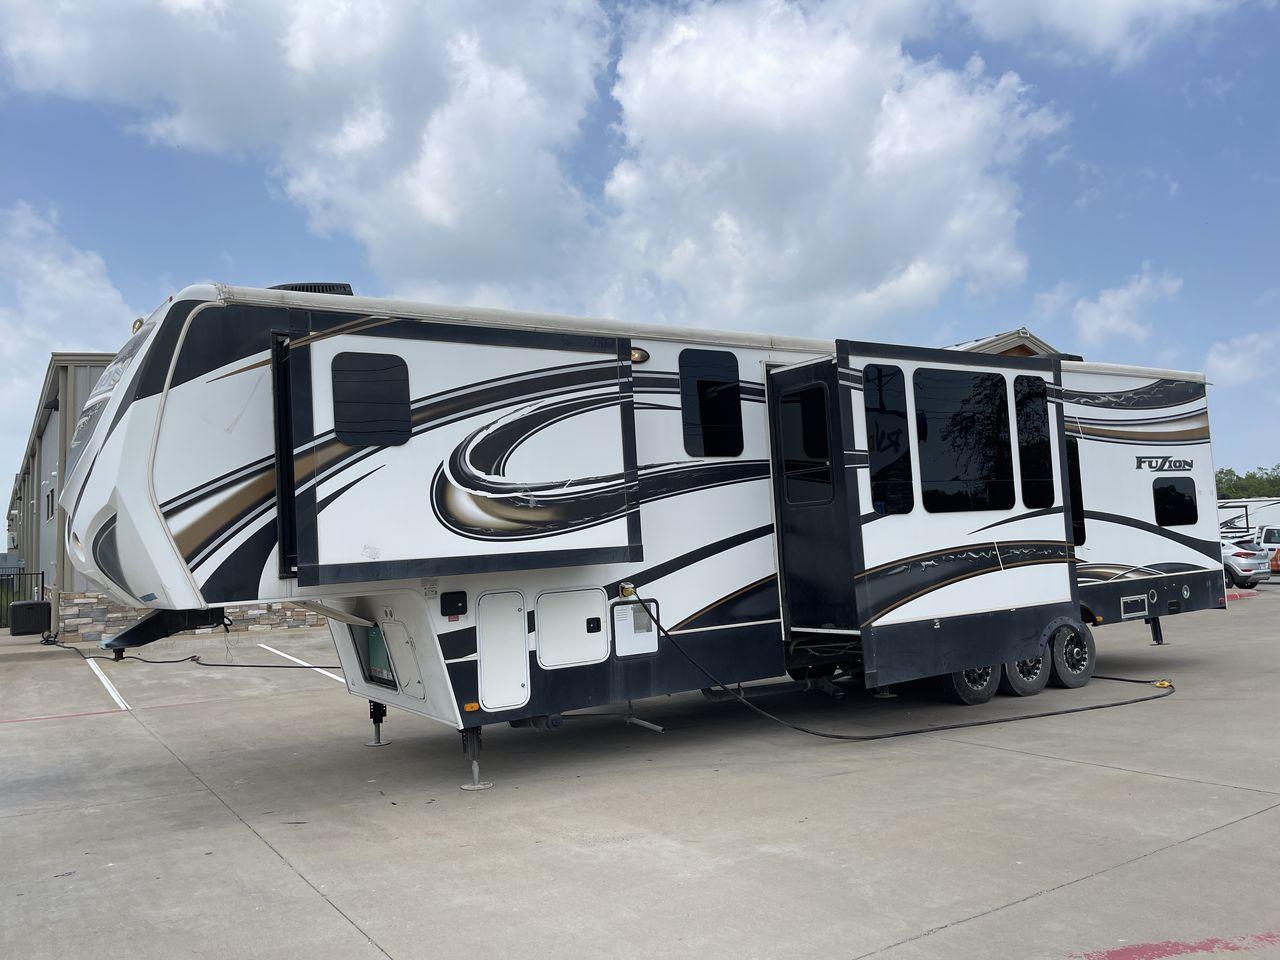 2014 WHITE KEYSTONE FUZION M-399 (4YDF39939EF) , Length: 41 ft. | Dry Weight: 14,100 lbs. | Gross Weight: 18,000 lbs. | Slides: 3 transmission, located at 4319 N Main Street, Cleburne, TX, 76033, (817) 221-0660, 32.435829, -97.384178 - The 2014 Keystone Fuzion M-399 offers exceptional value for its price. With its white exterior color, this RV stands out on the road and is sure to turn heads wherever you go. Measuring 41 ft. in length, this toy hauler provides ample space for you and your loved ones to relax and enjoy your travels - Photo #25